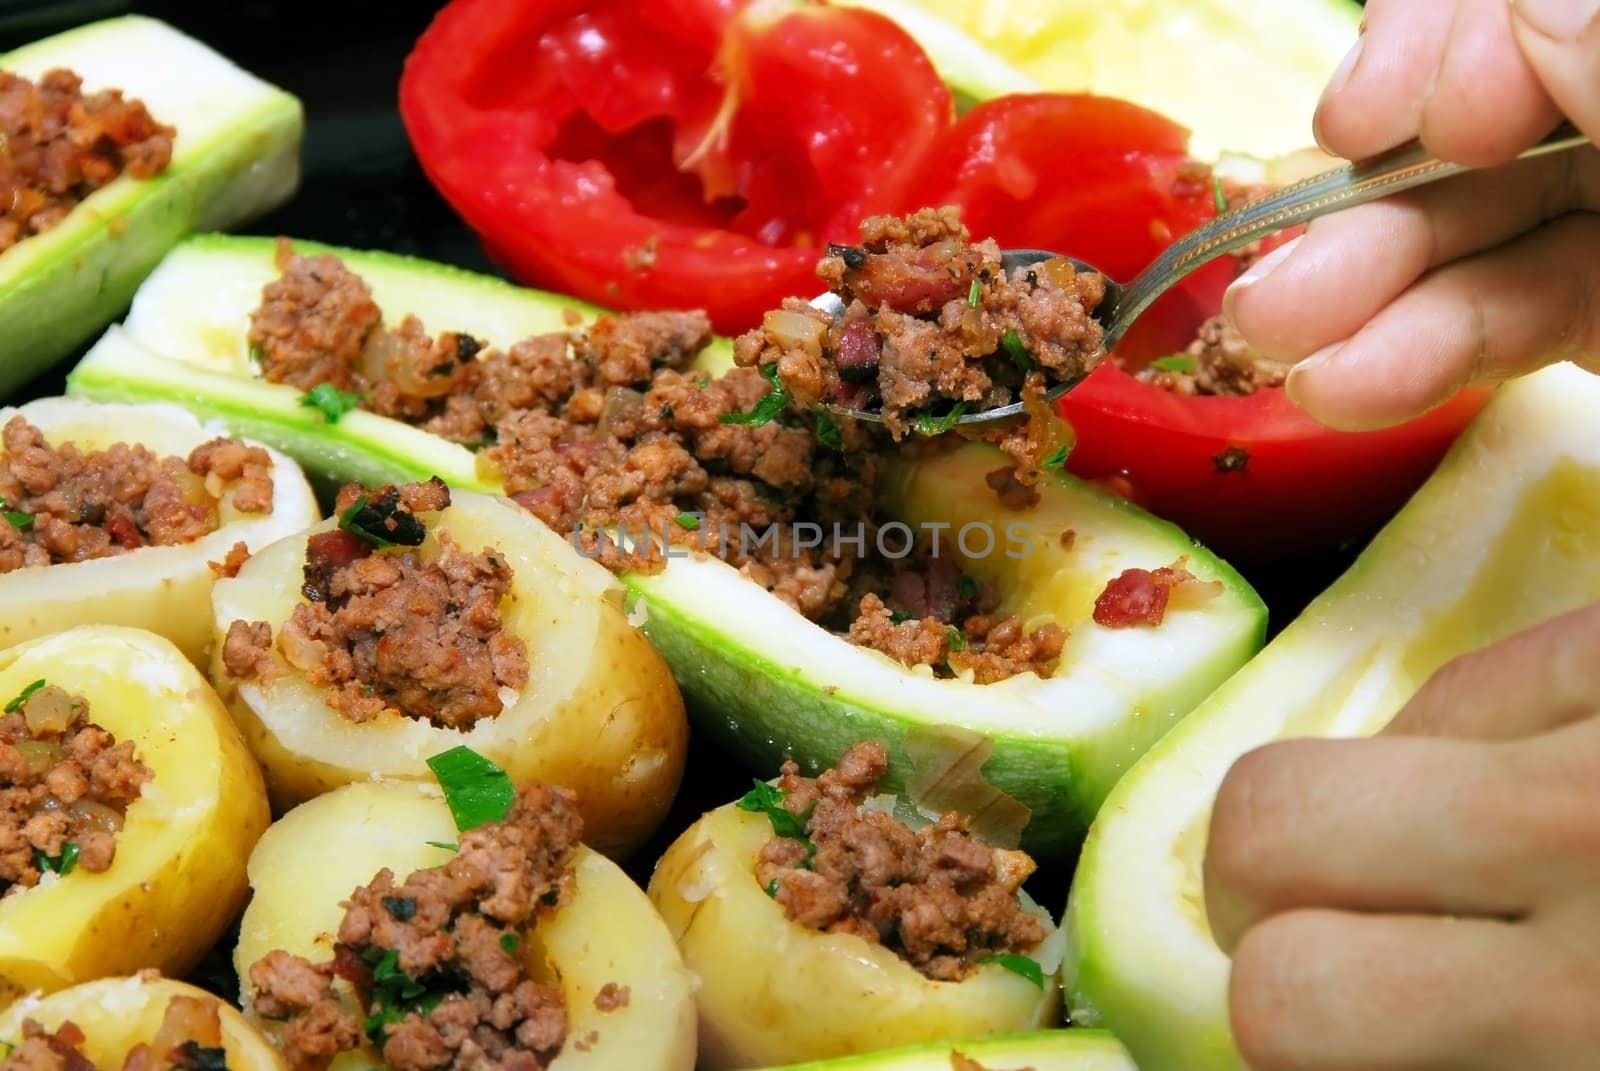 Stuffed vegetables by simply